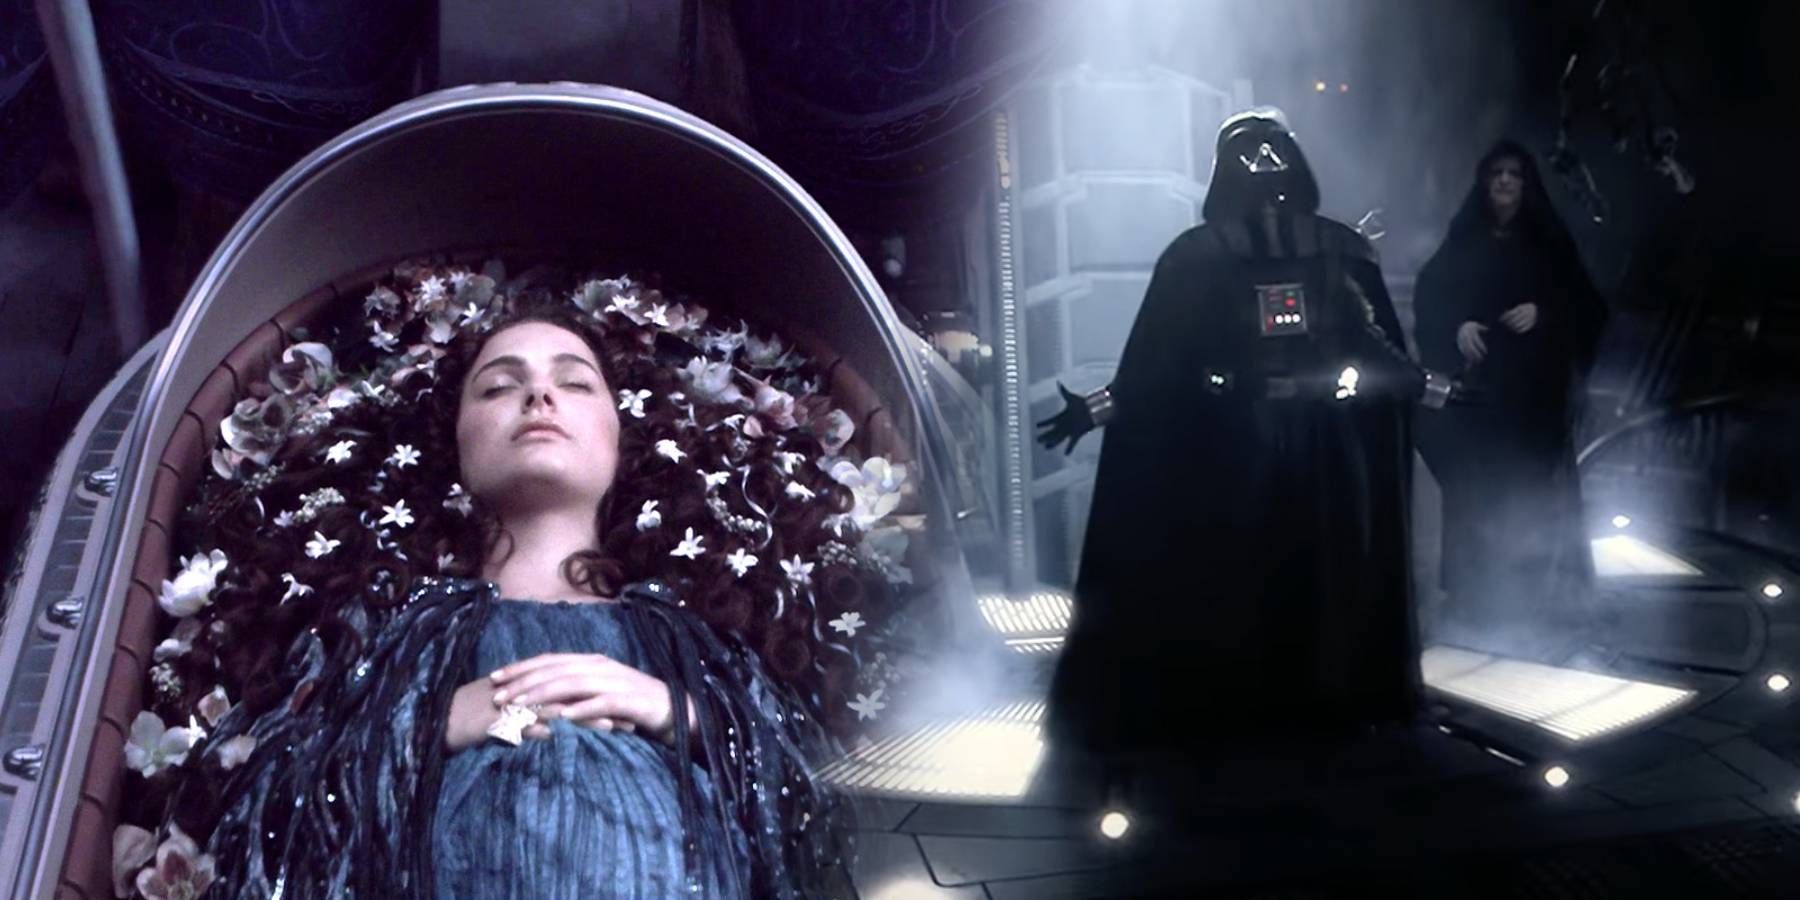 Natalie Portman as Padmé Amidala in Padmé's funeral scene and Darth Vader both from Star Wars: Episode III: Revenge of the Sith